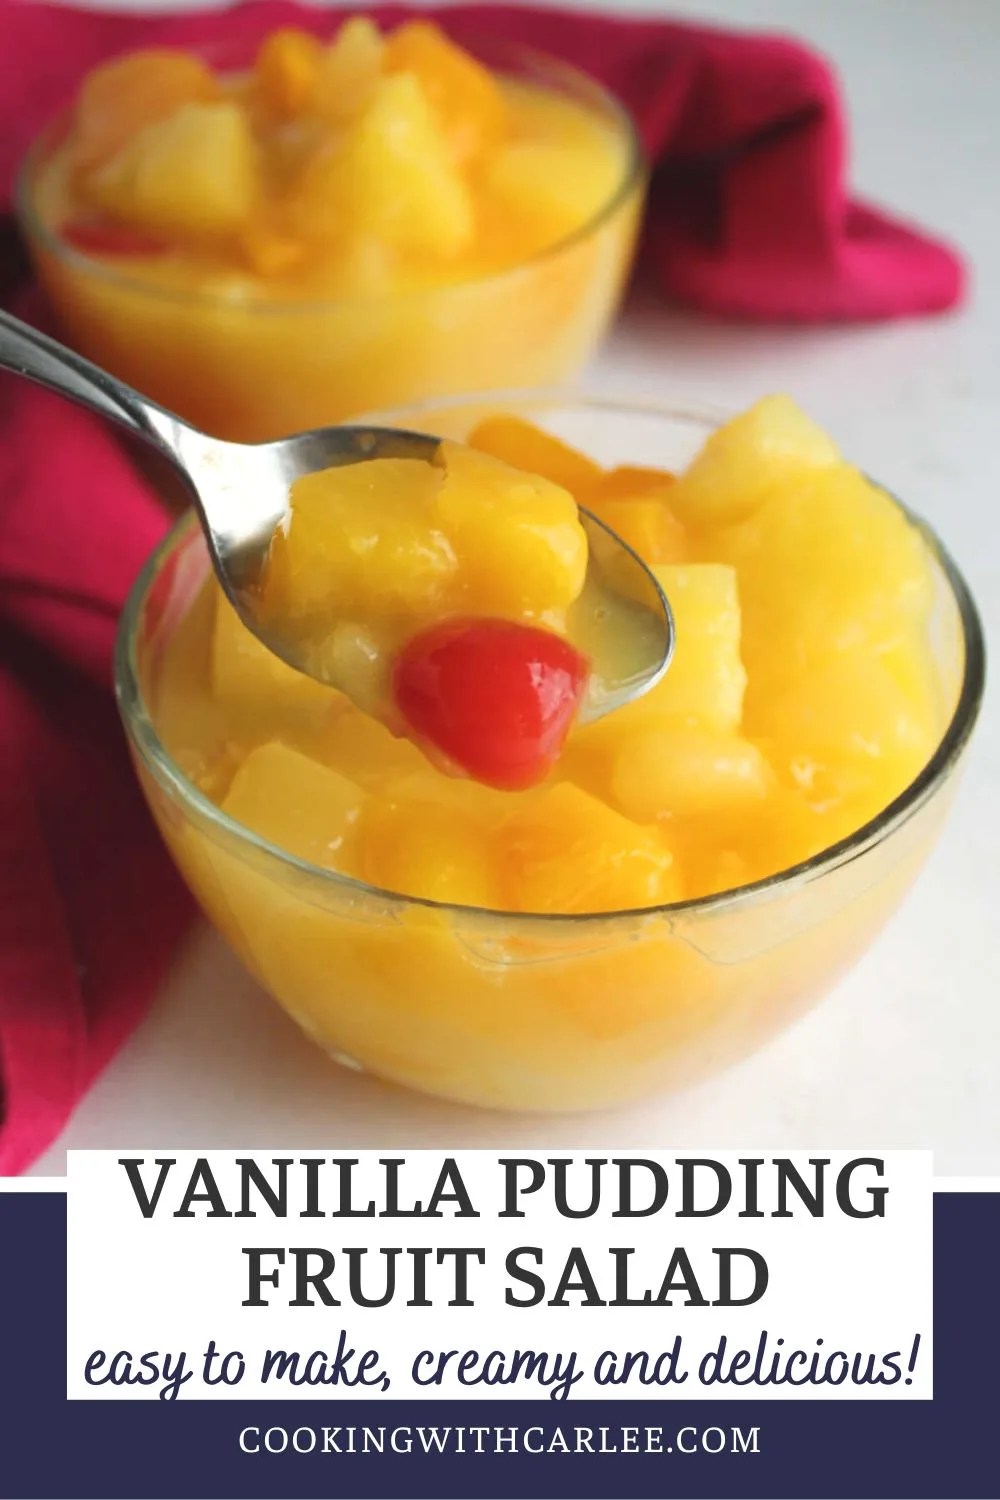 This vintage fruit salad recipe uses some vanilla instant pudding to give the sauce body and flavor. It is a wonderful side dish or you could even serve it as a simple dessert.